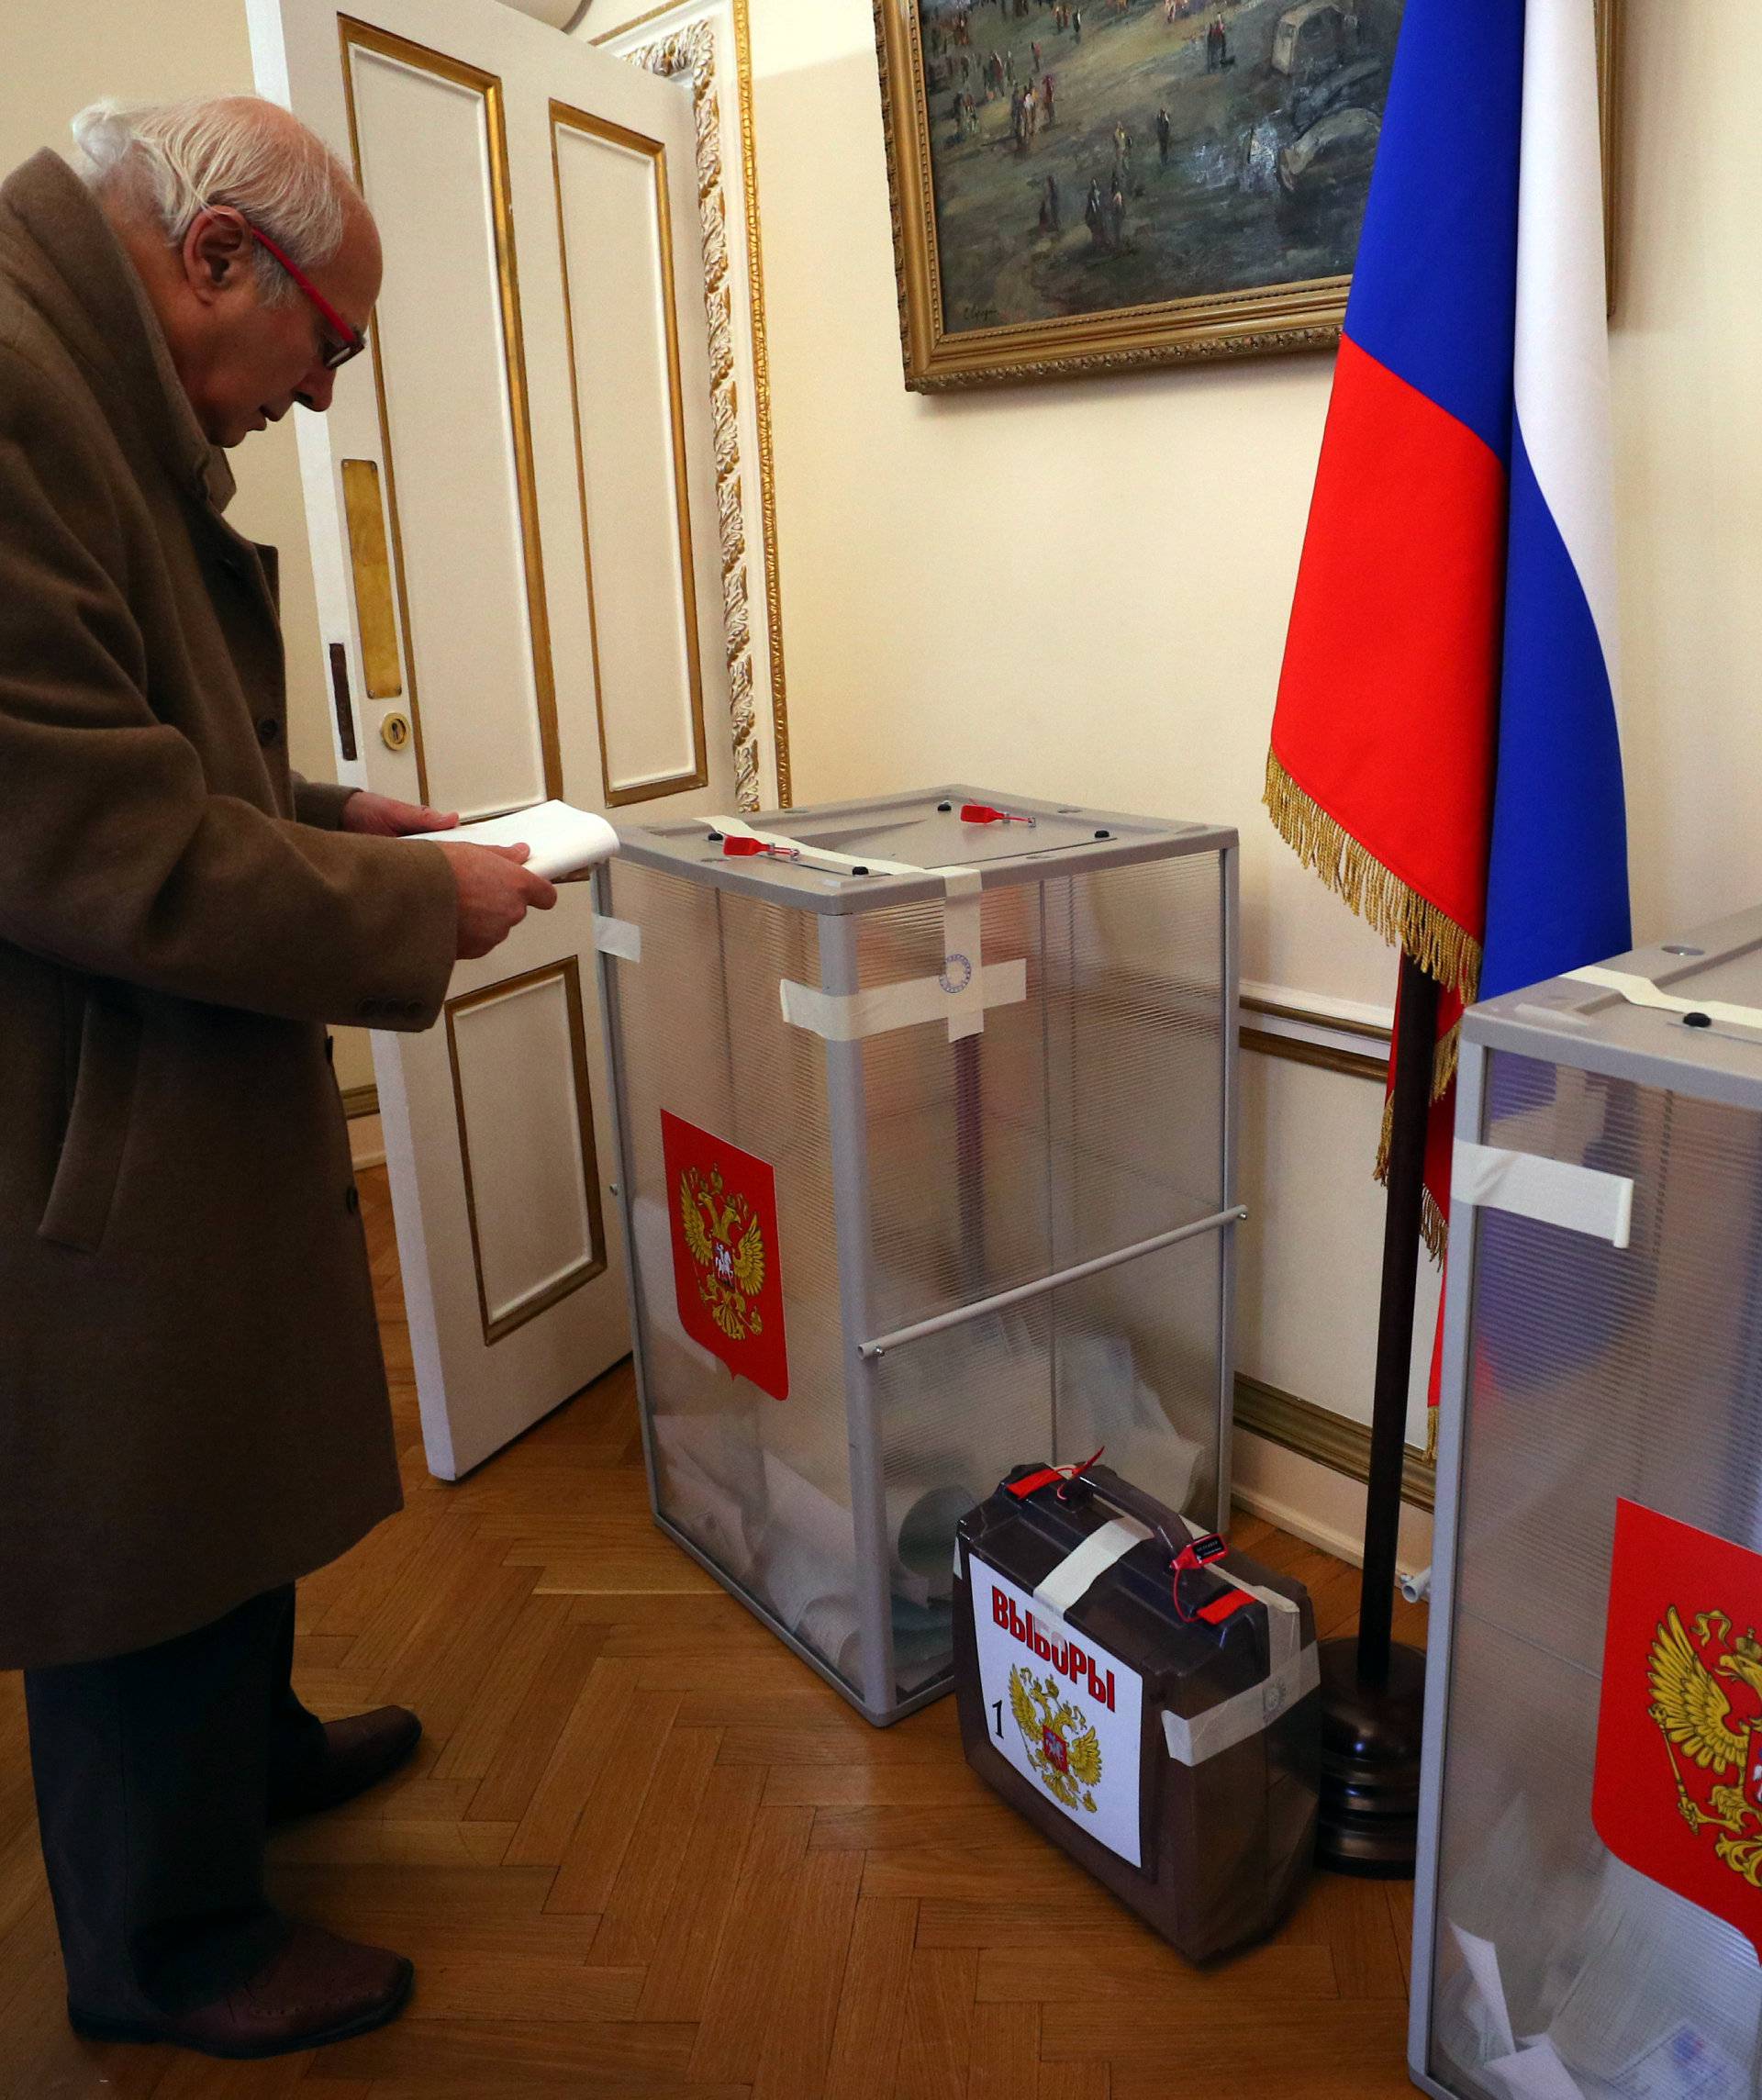 A man approaches a ballot box, during the presidential election, inside the Russian Embassy in London